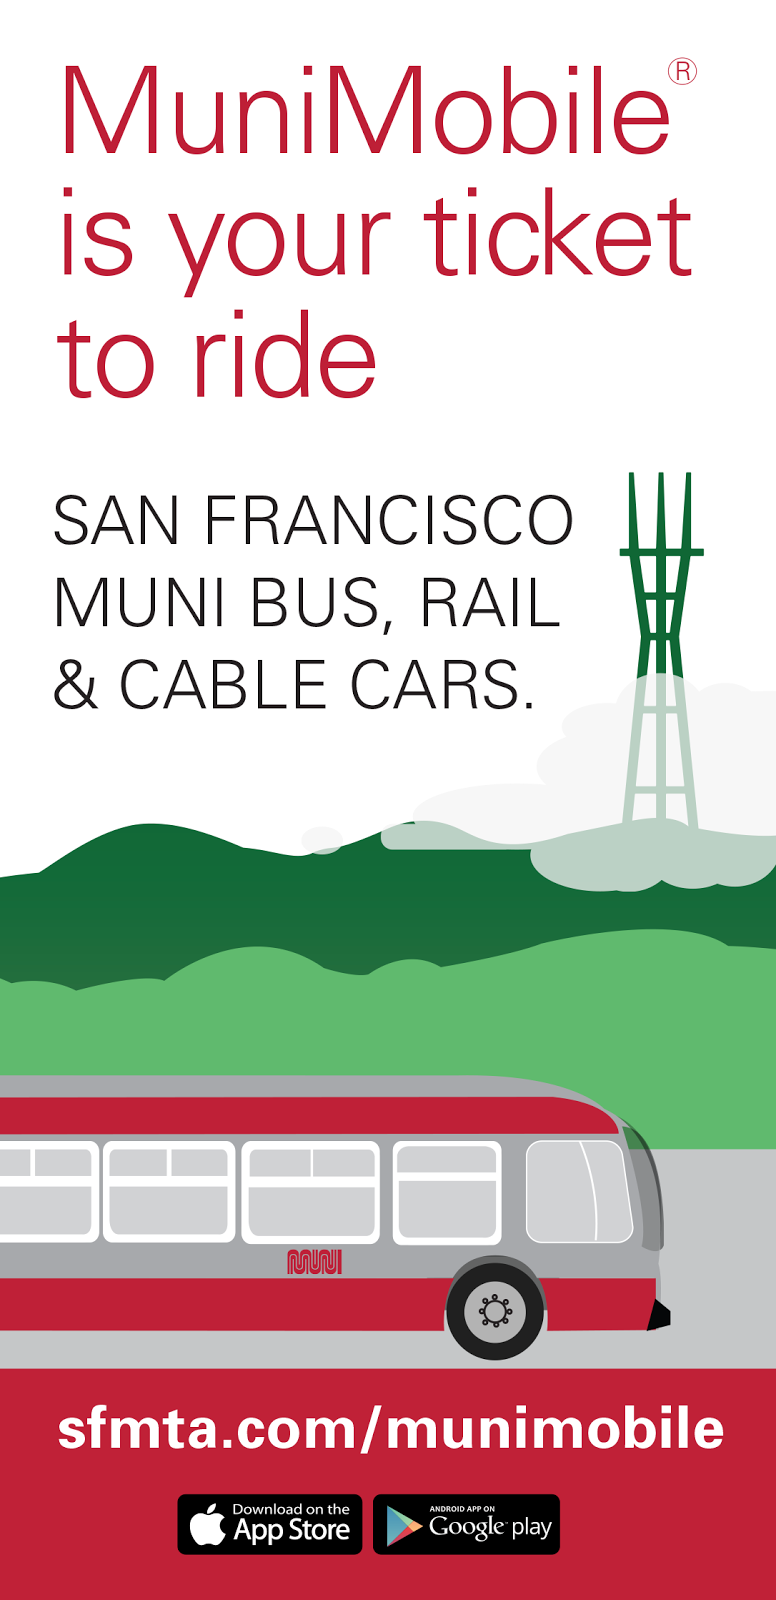 Advertisement for MuniMobile with the text, "MuniMobile is your ticket to ride San Francisco Muni bus, rail and cable cars. sfmta.com/munimobile Download at the Apple App Store. Download at Google Play."